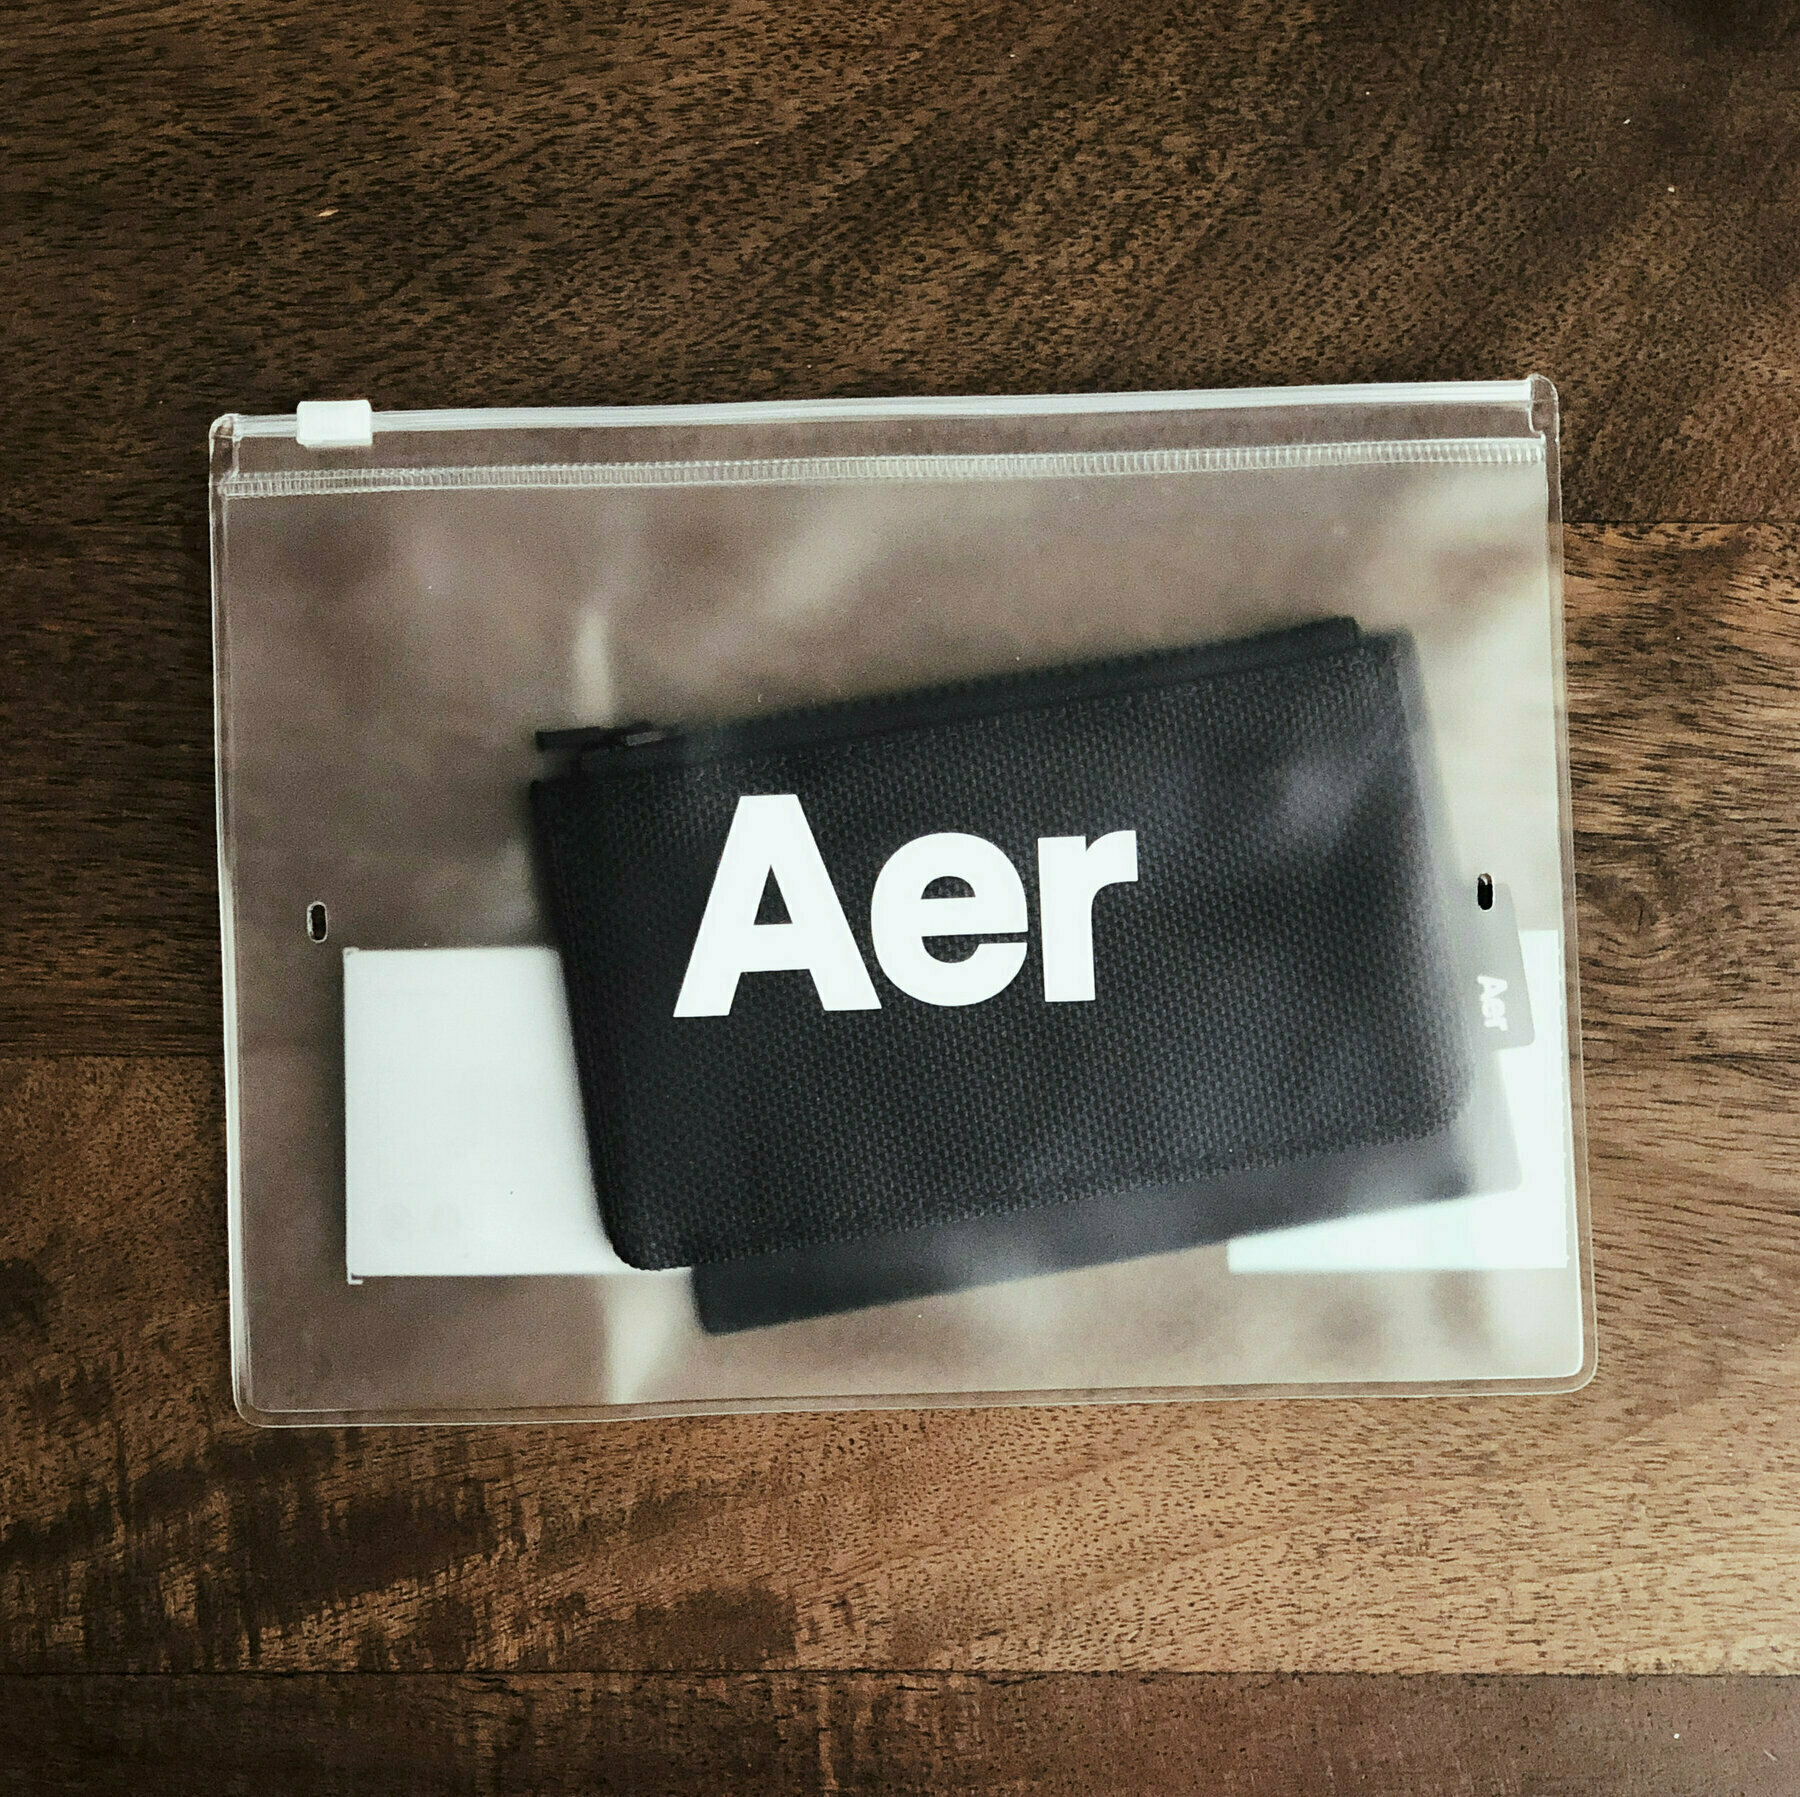 The Aer Cardholder as it arrives in its zippered plastic packaging